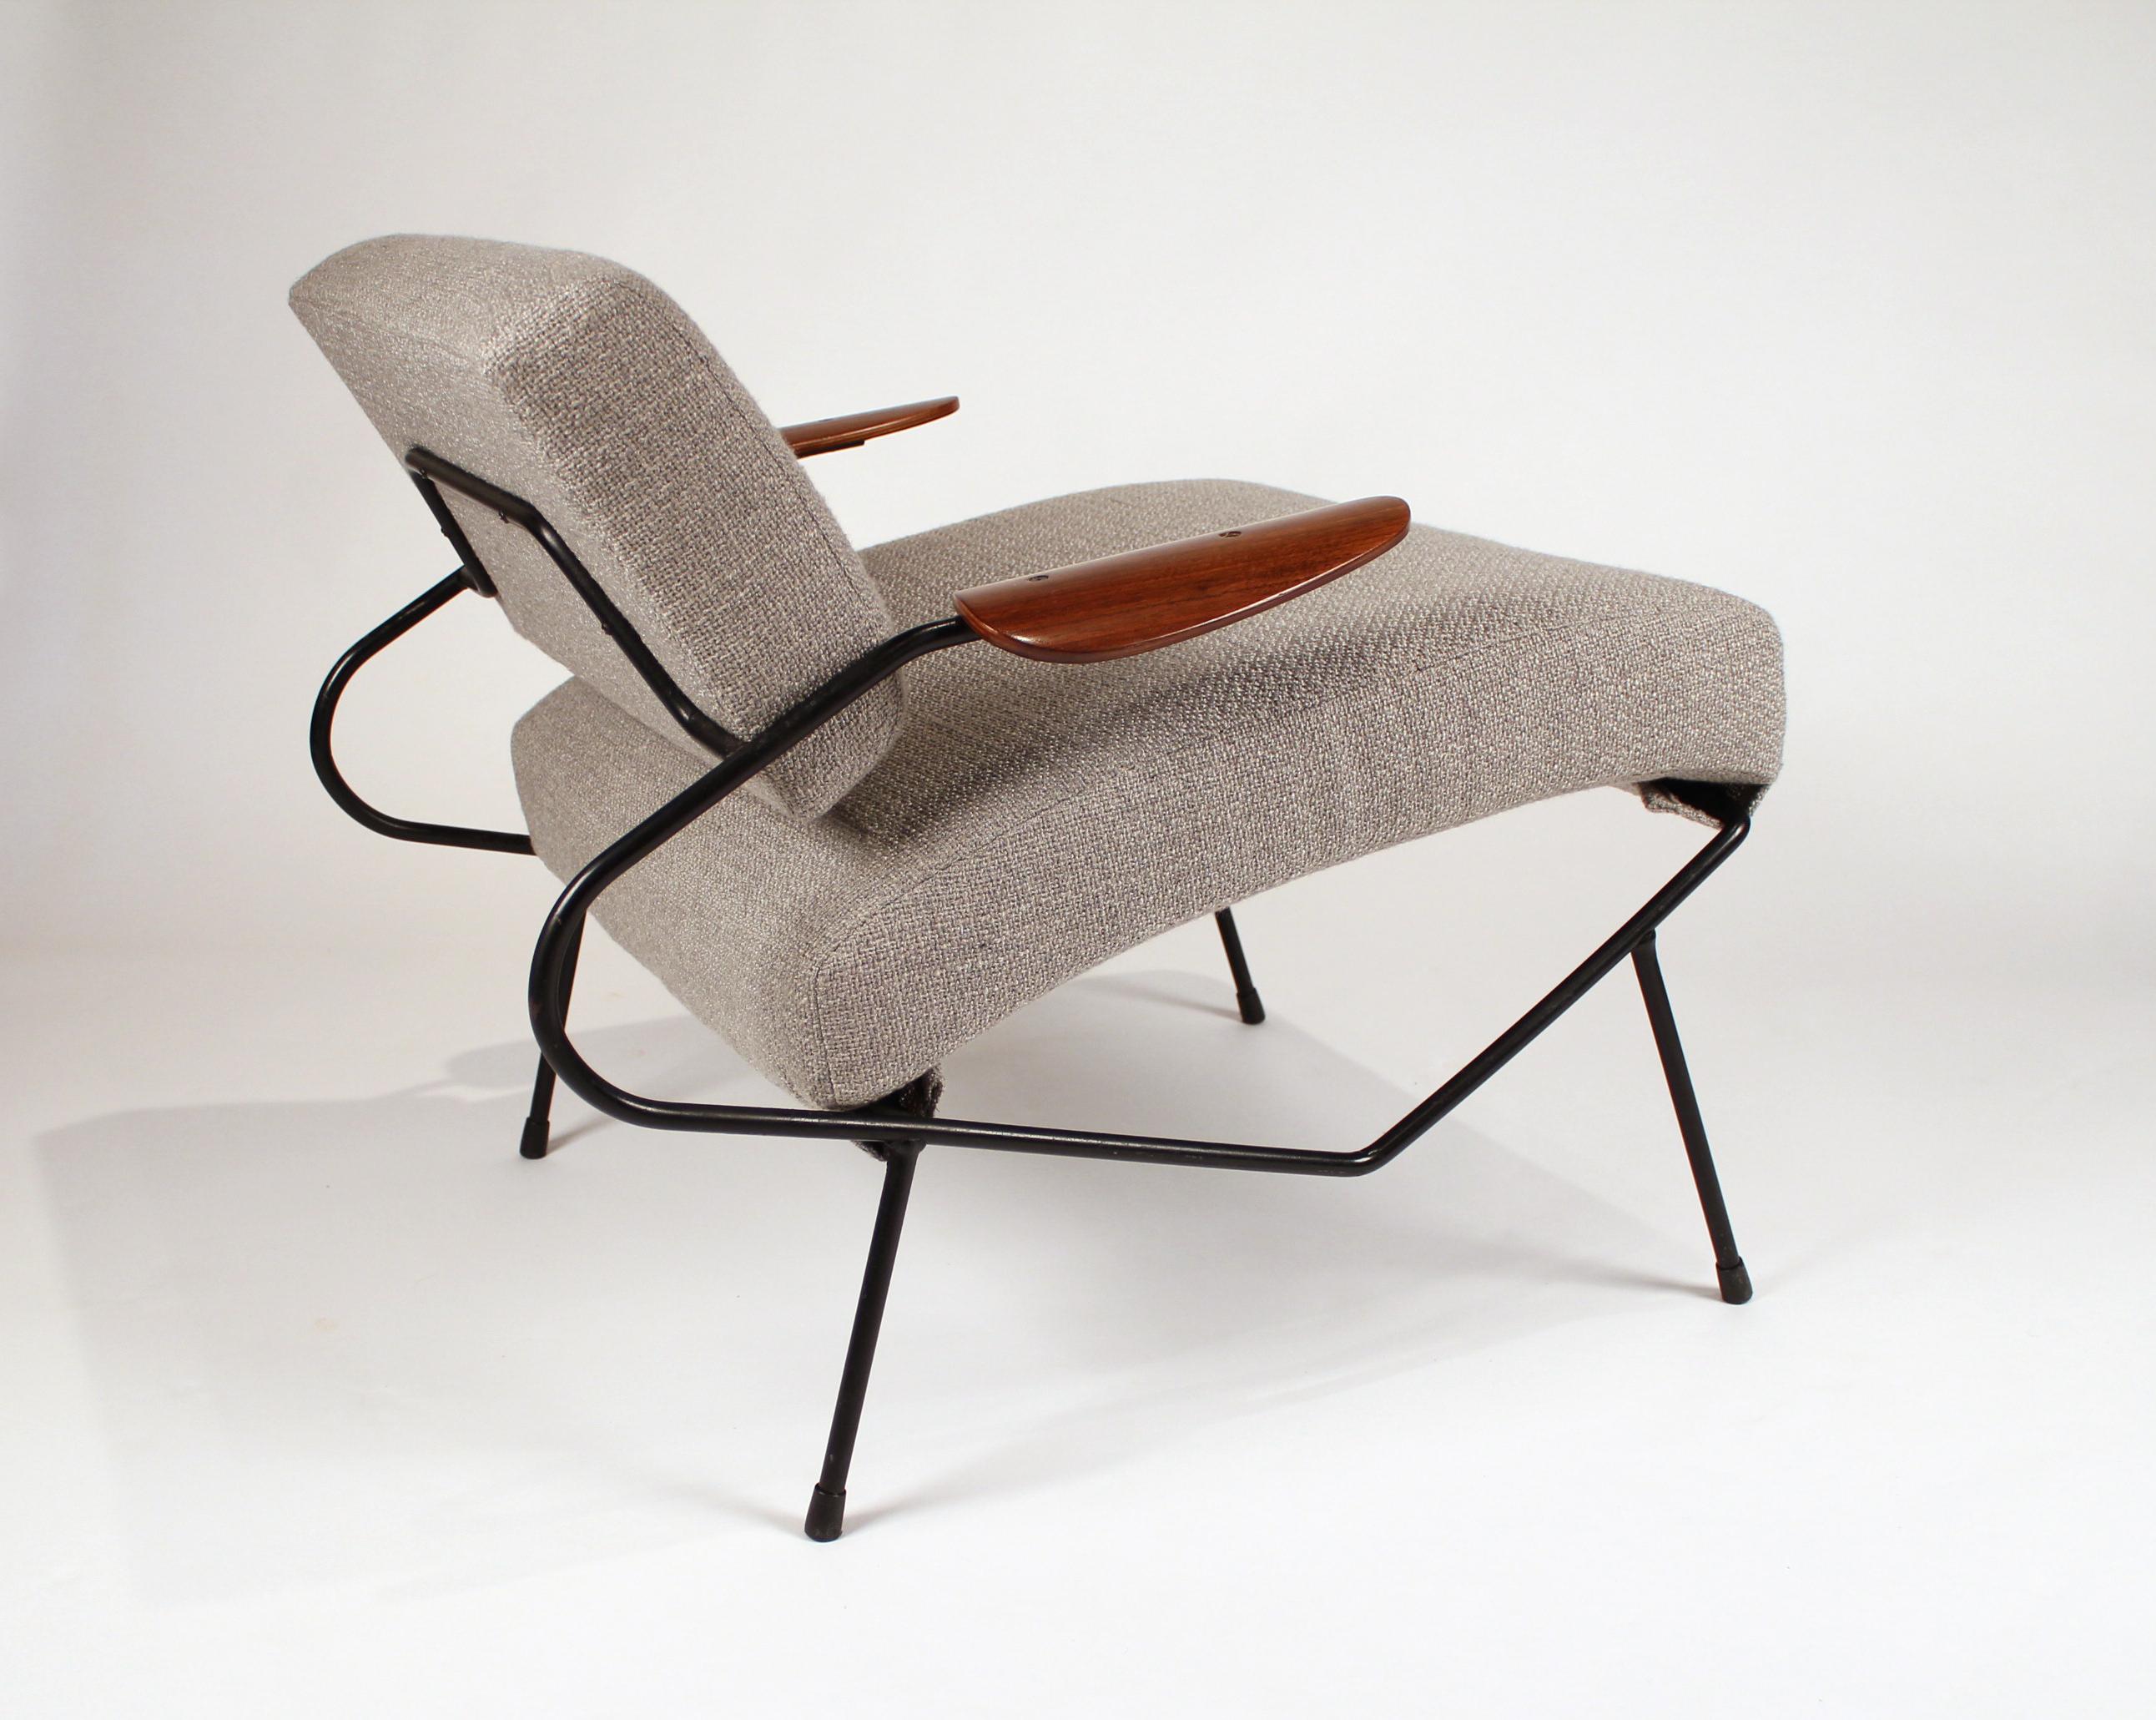 Early Dan Johnson lounge chair with an iron frame and steam bent walnut plywood armrests.